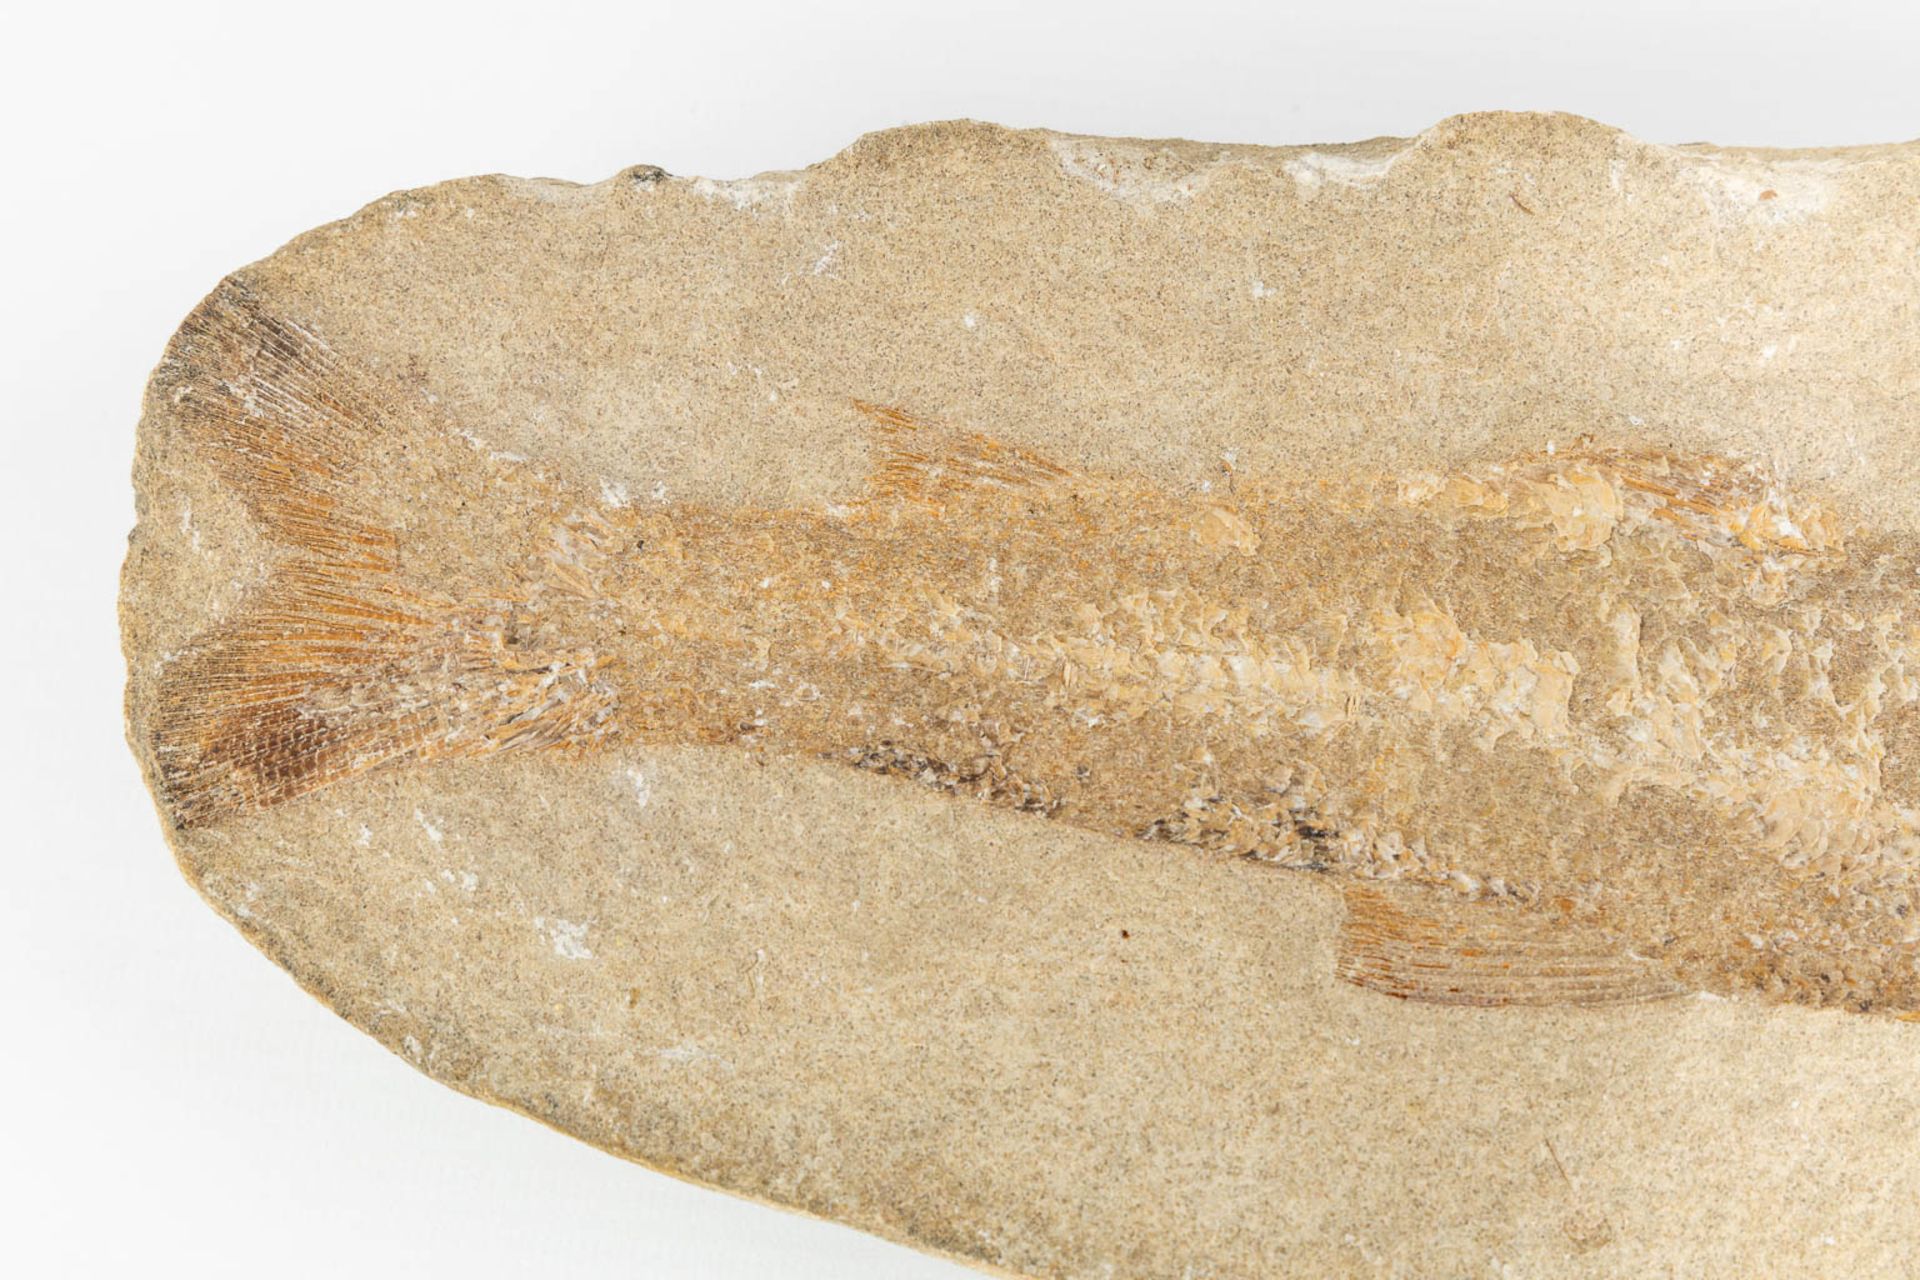 A fossil of a fish in a stone, with both pieces. (L:8 x W:32 x H:15 cm) - Bild 8 aus 11